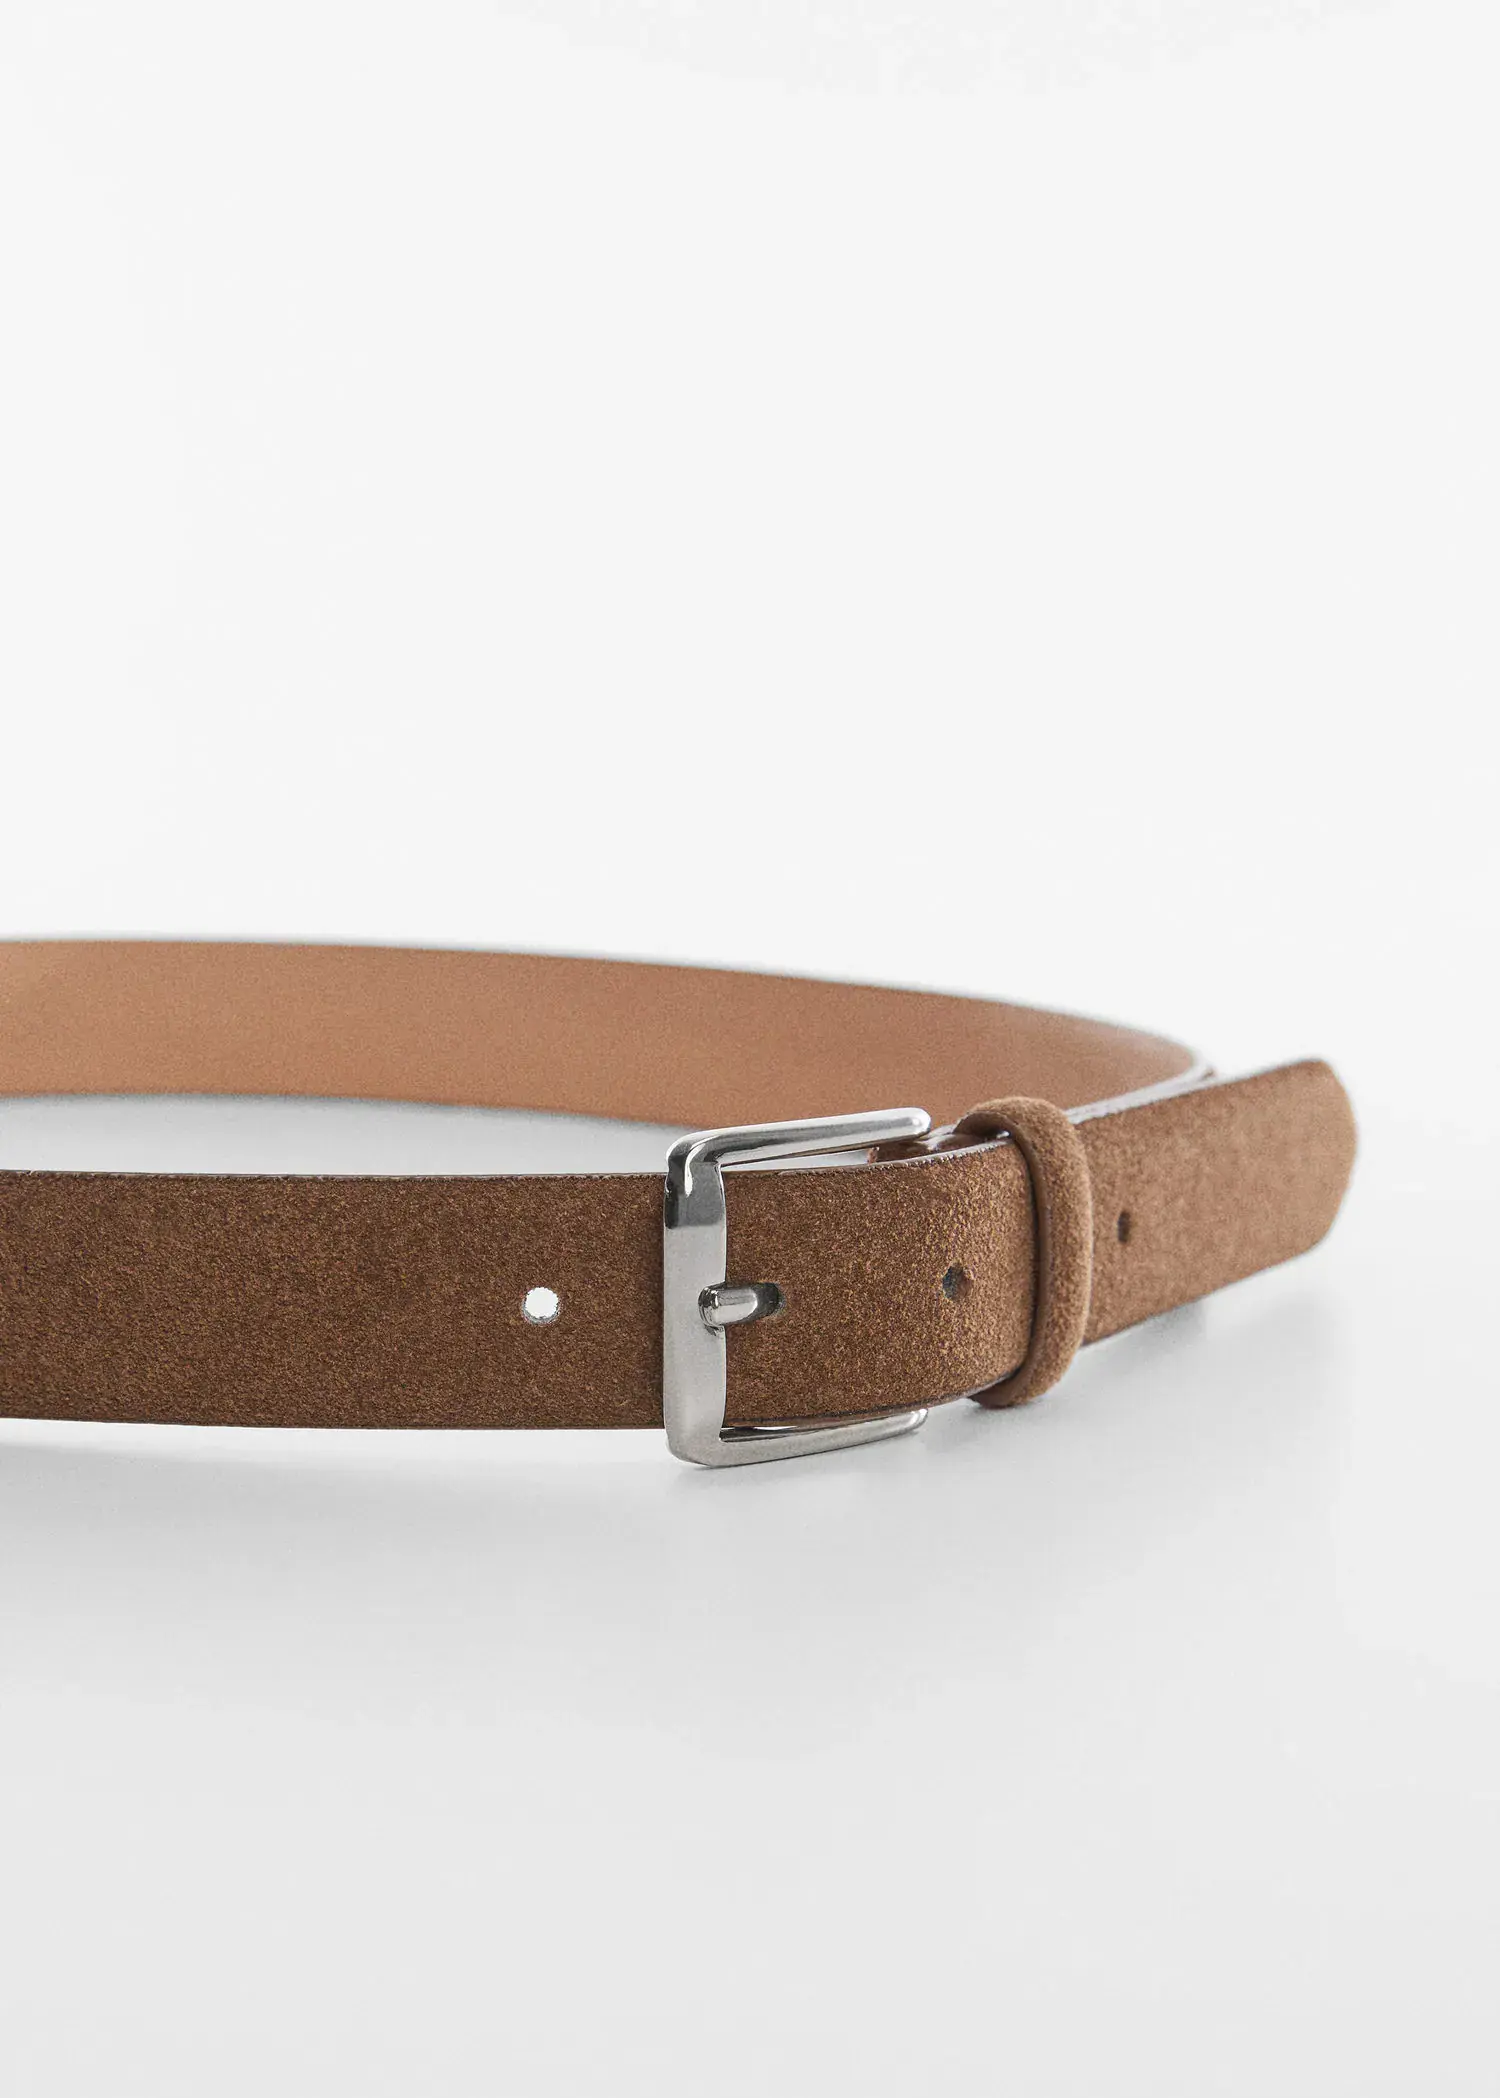 Mango Suede belt. a close-up of a brown belt with a silver buckle. 